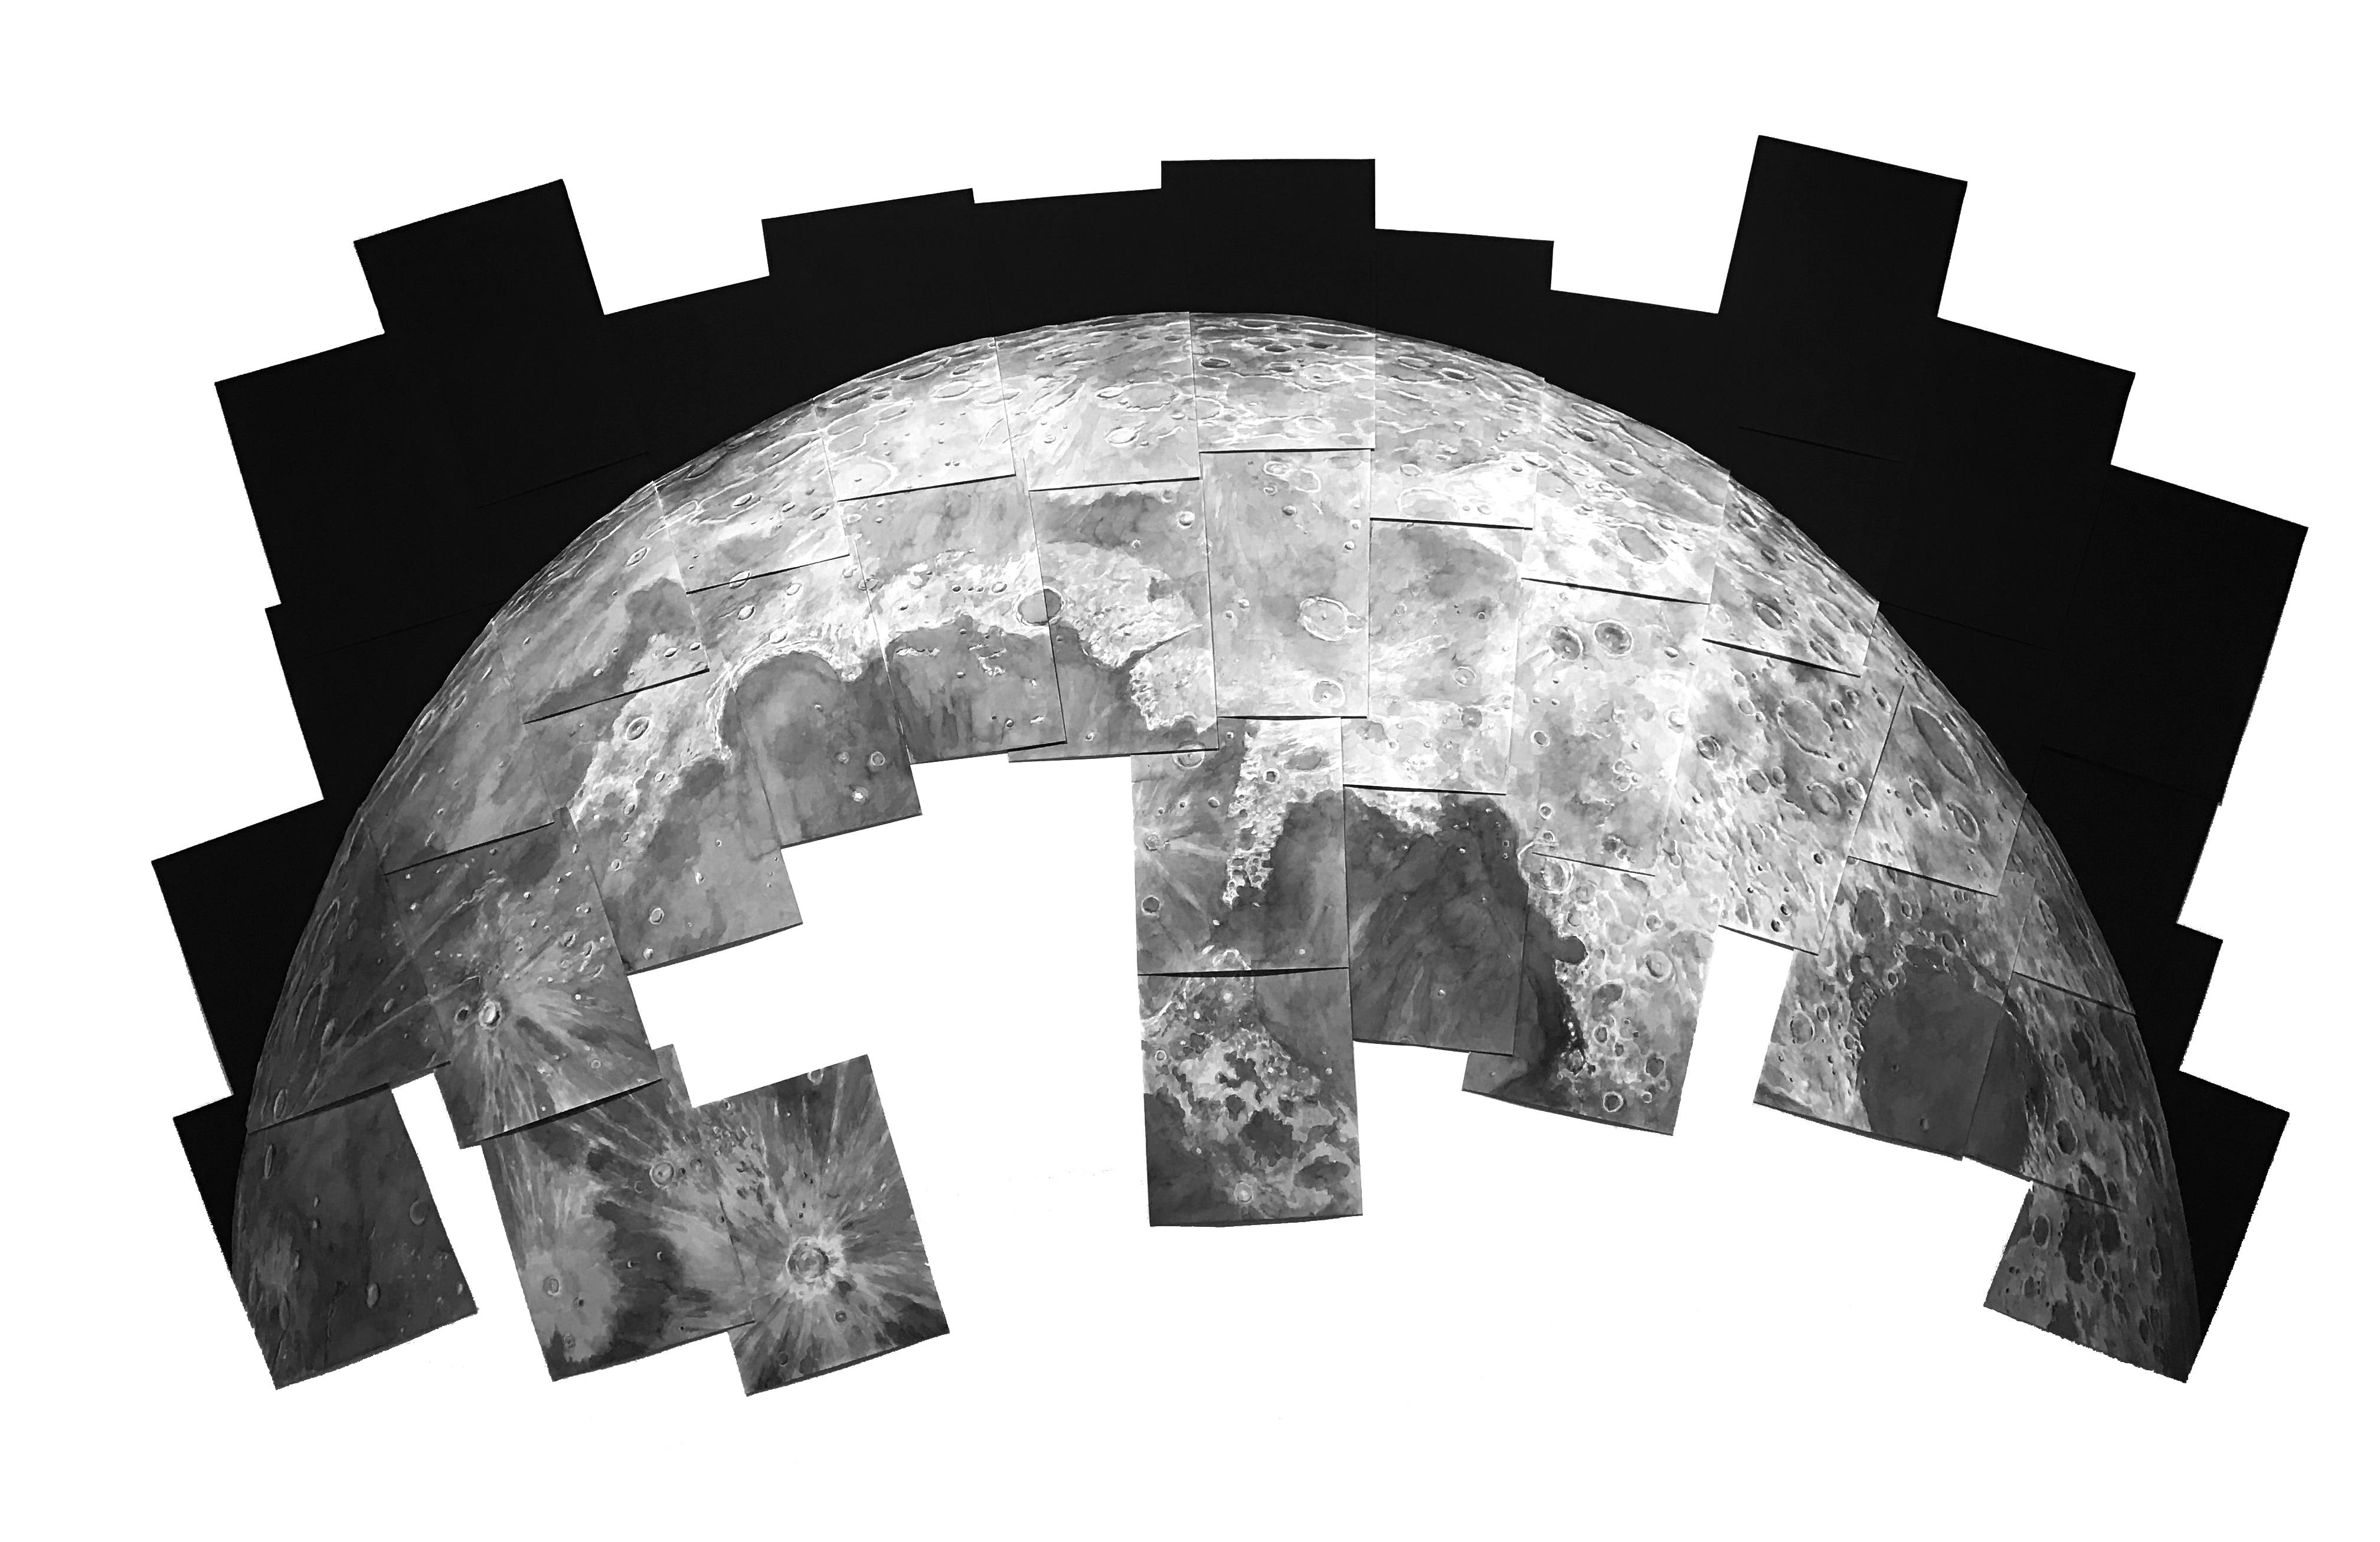 Thomas Broadbent Landscape Painting - "Moon Arc", Multi-panel black and white watercolor painting installation